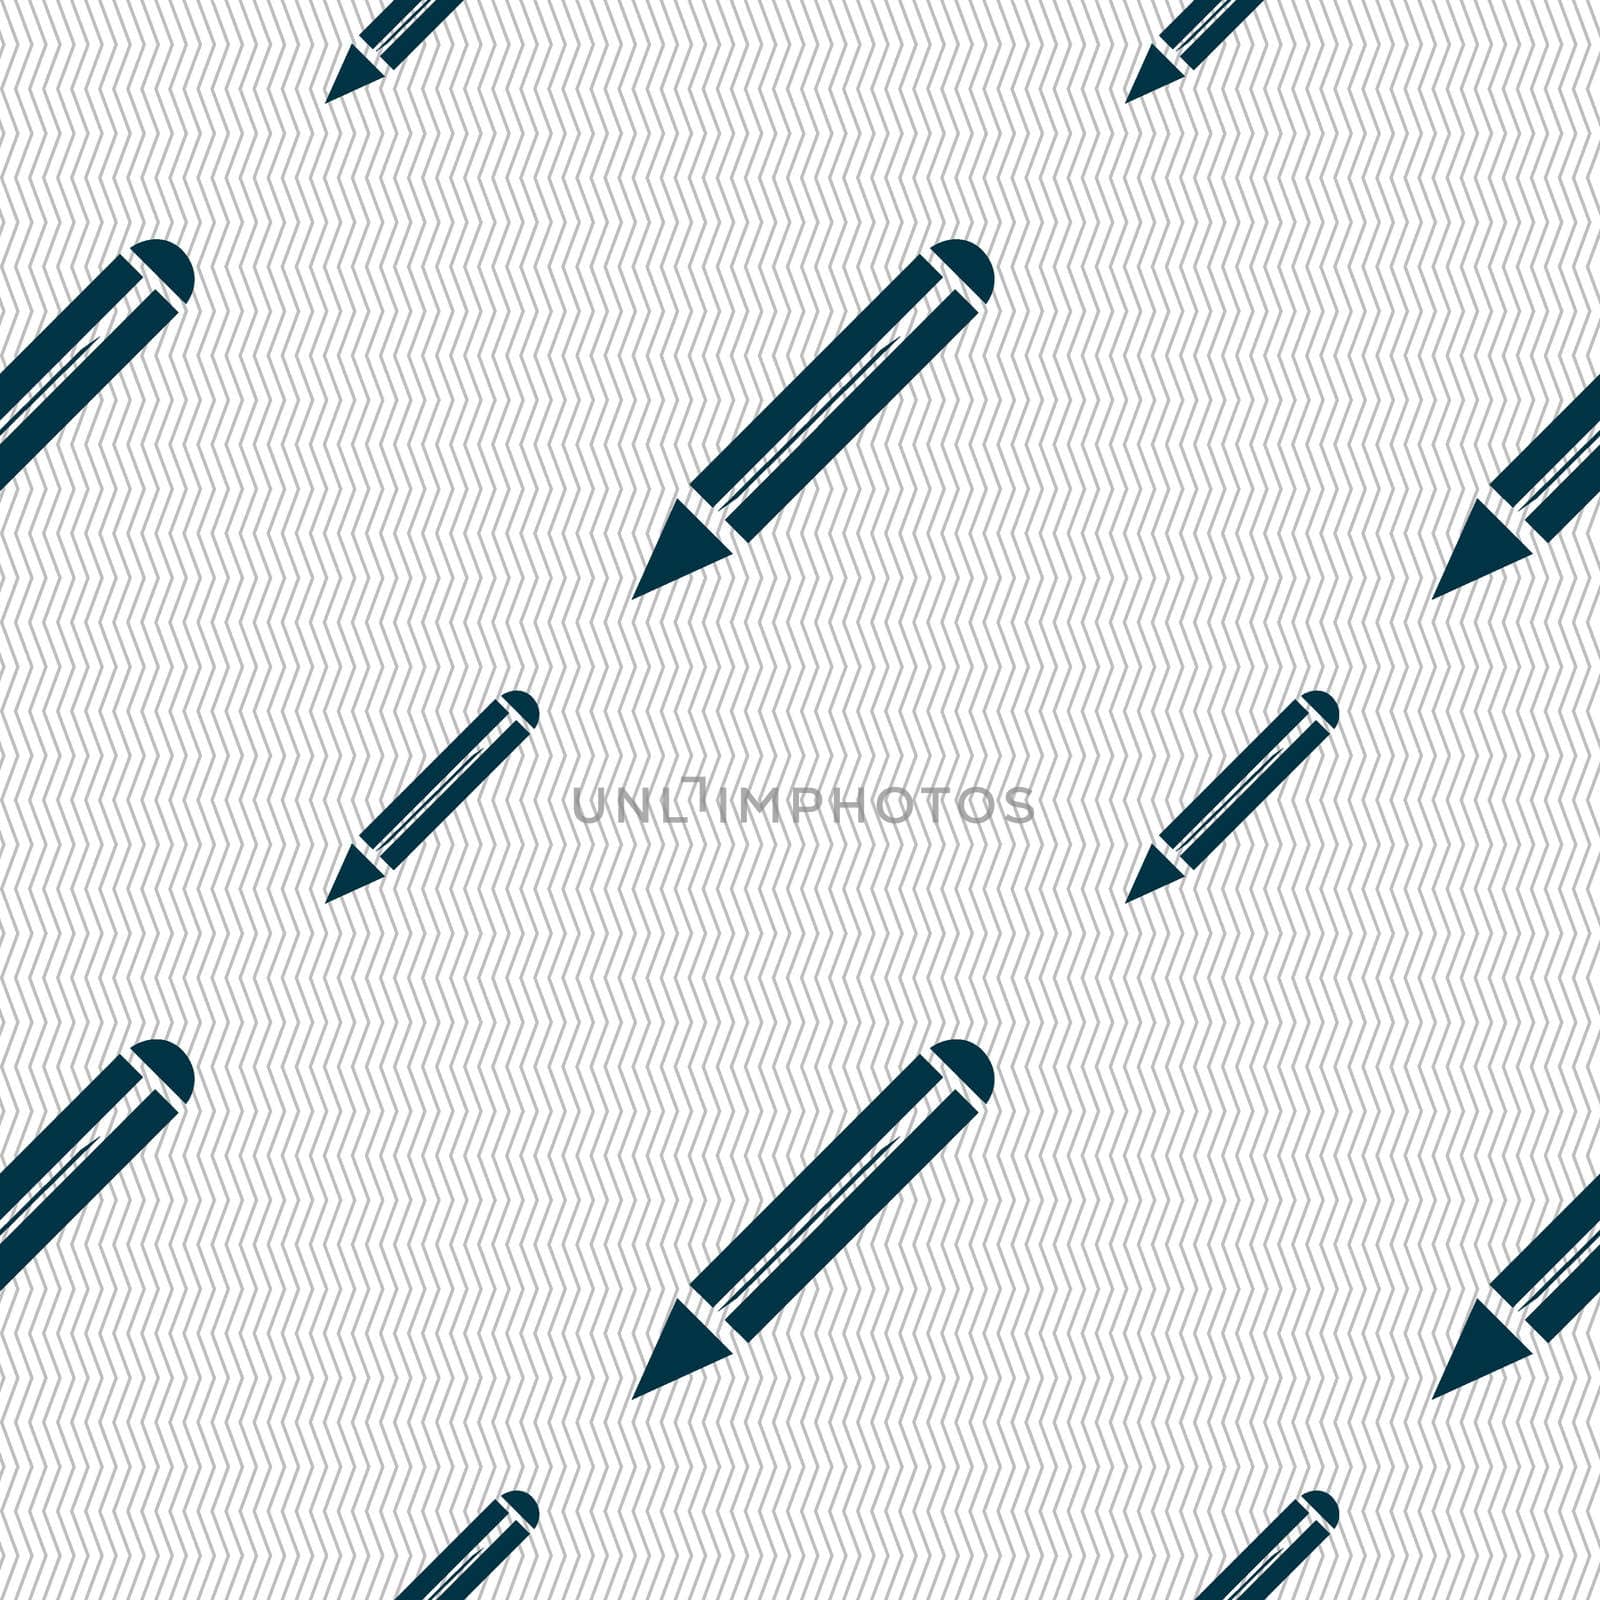 Pencil sign icon. Edit content button. Seamless pattern with geometric texture. illustration